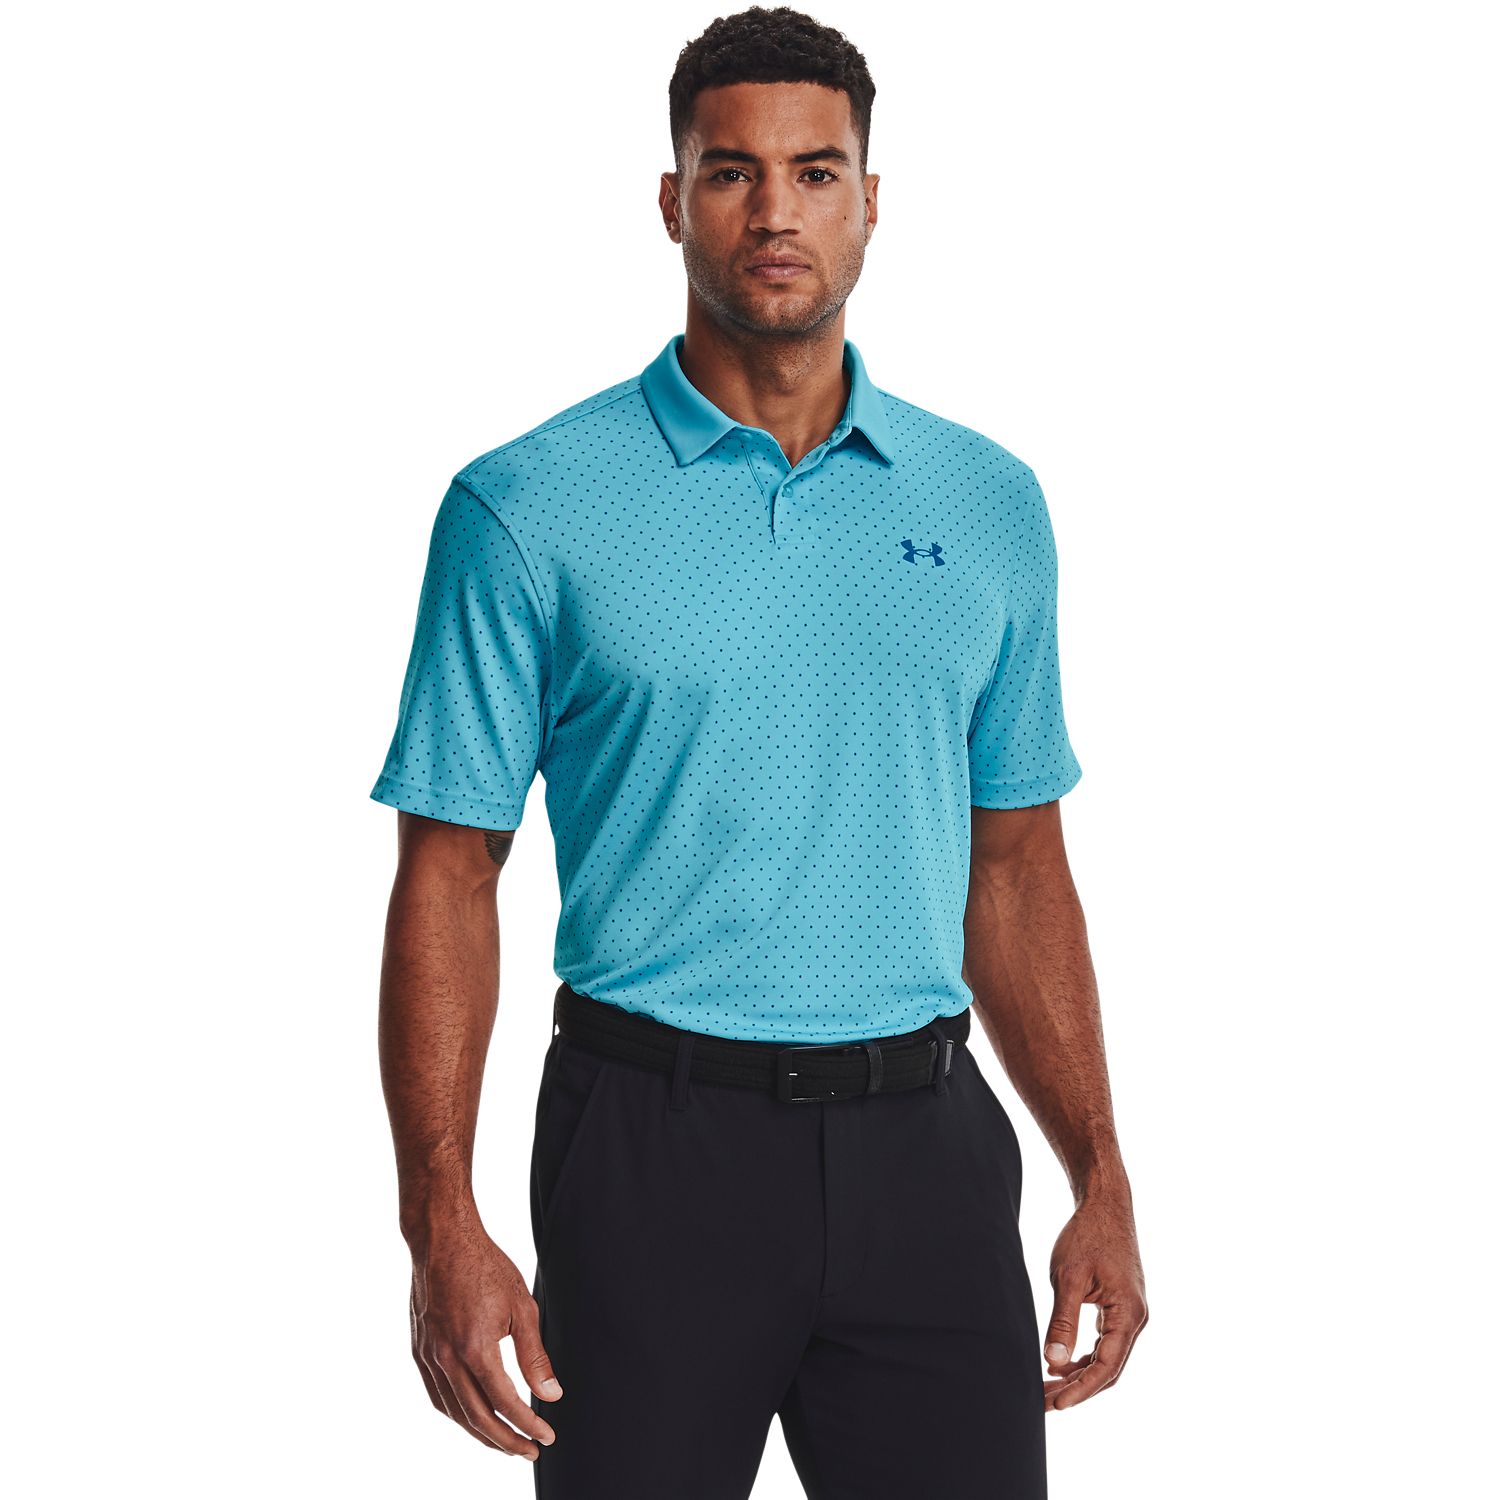 Top Golf Clothes Ideas from Under Armour